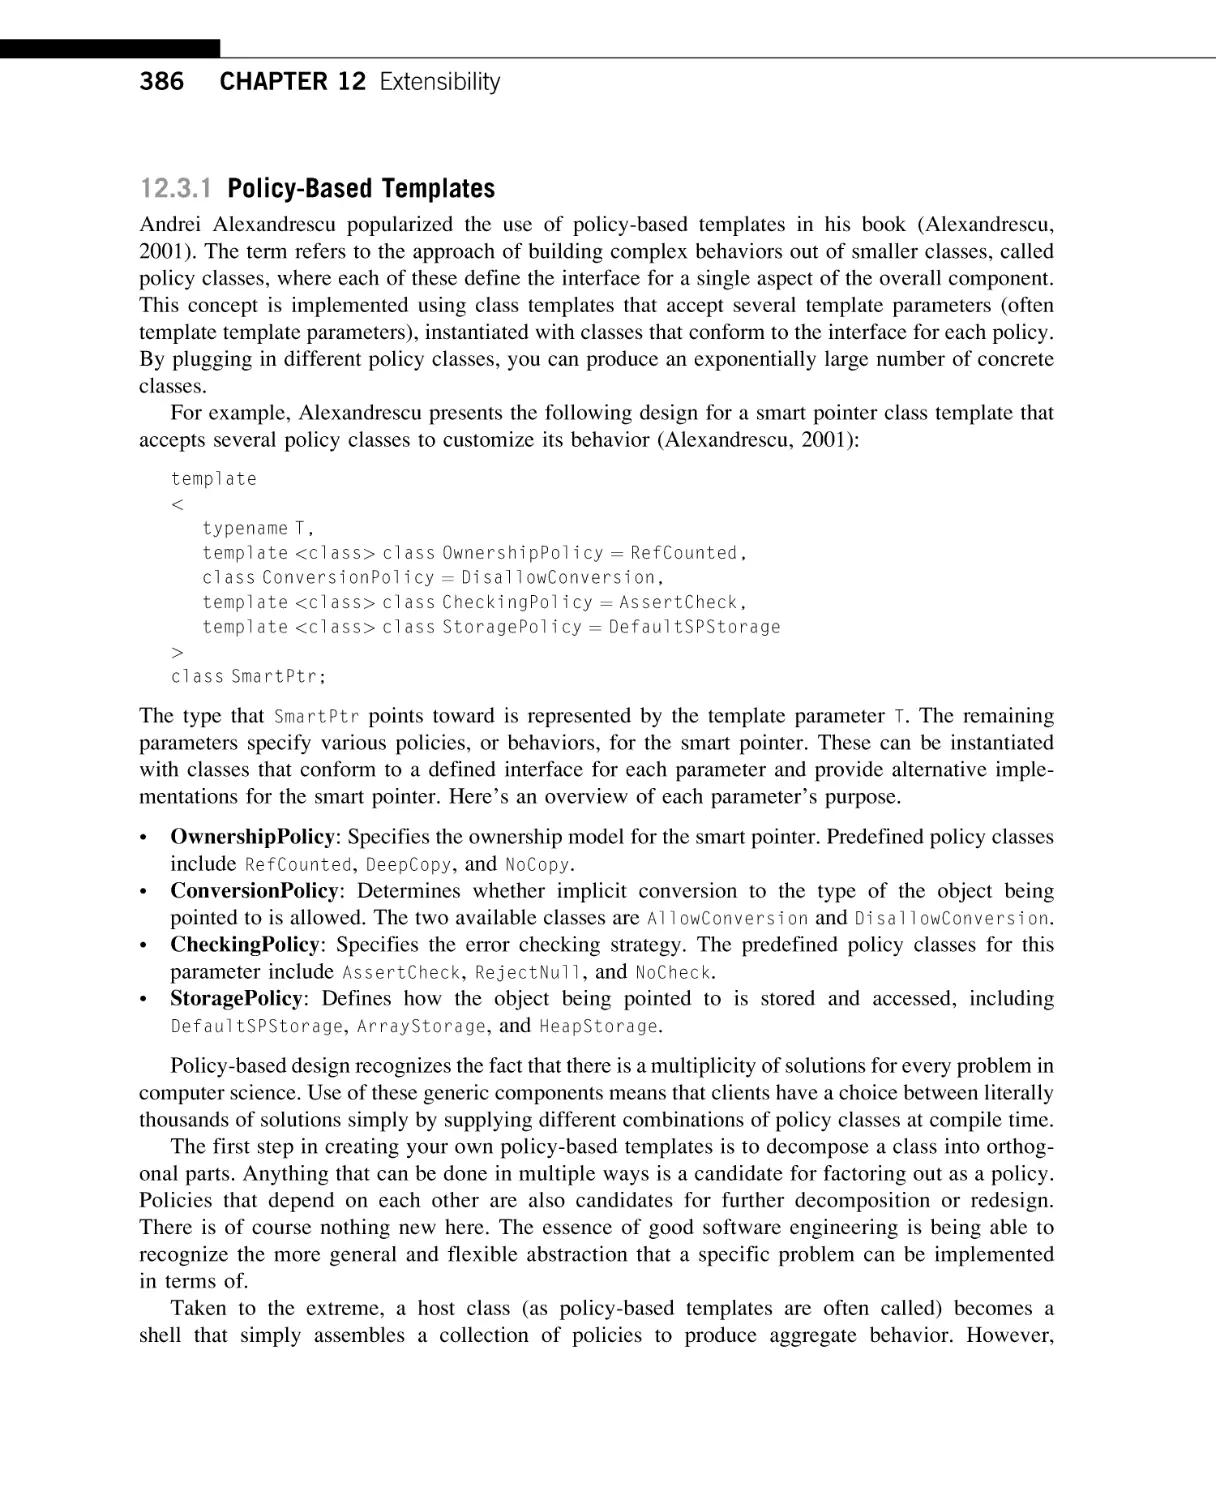 Policy-Based Templates